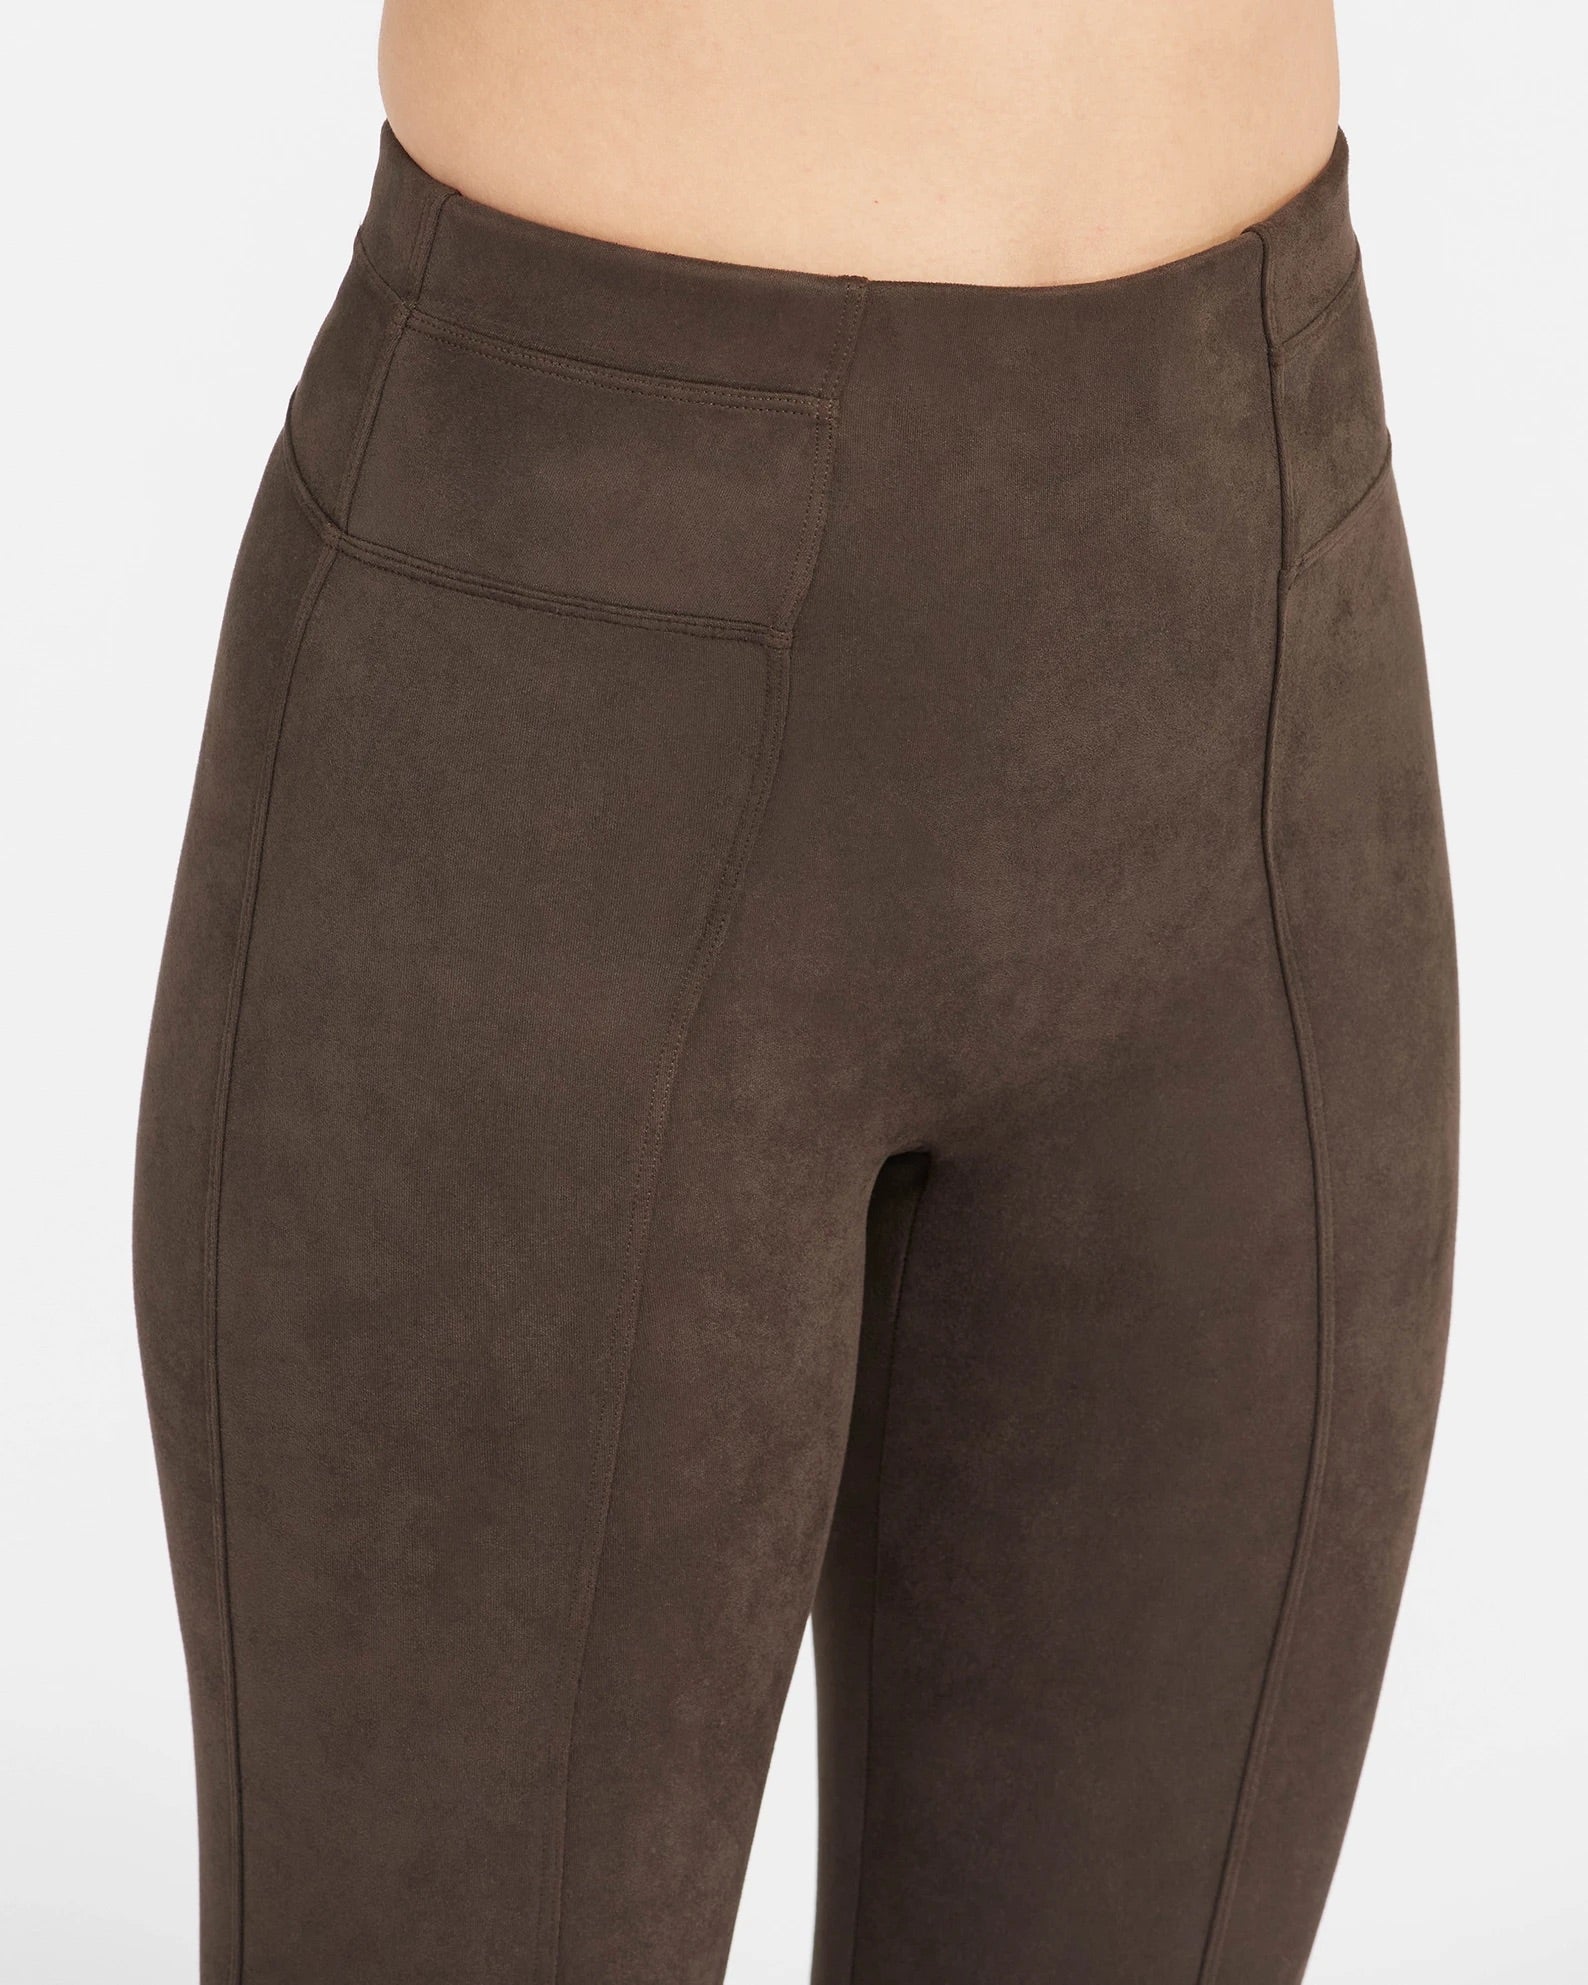 SPANX, Pants & Jumpsuits, Spanx Faux Suede Leggings In Color Chocolate